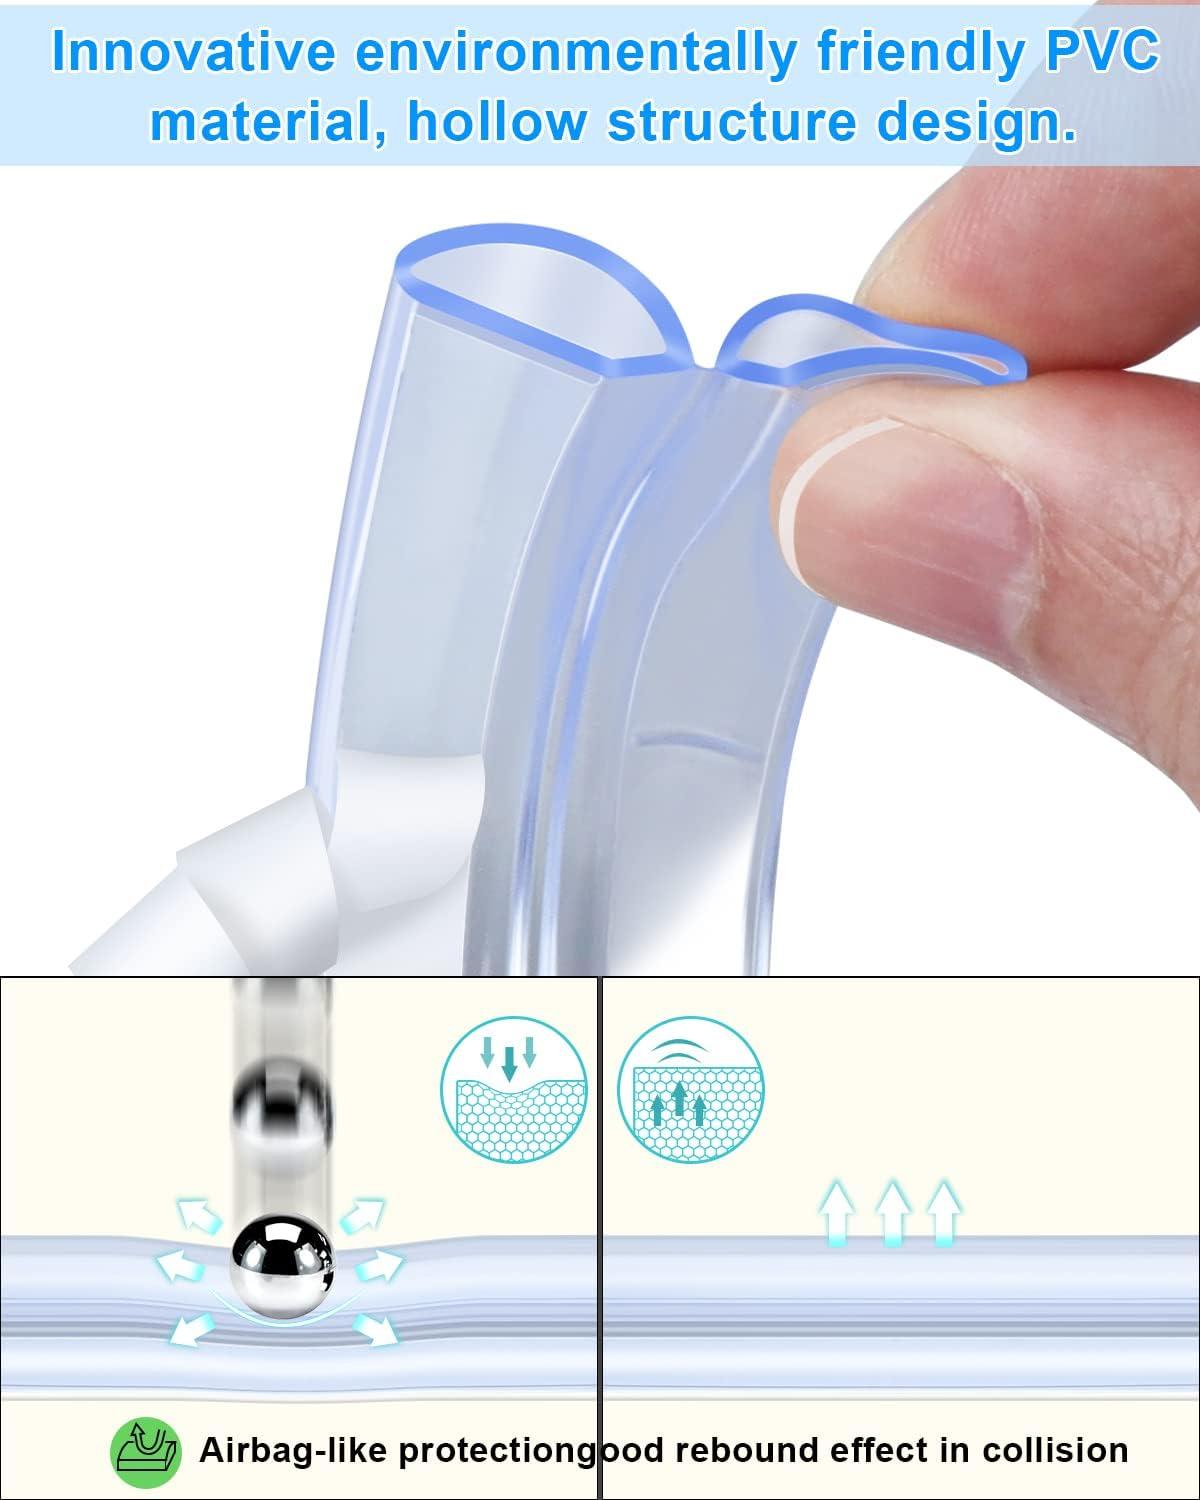 Baby Products Online - Baby proofing, transparent edge shield